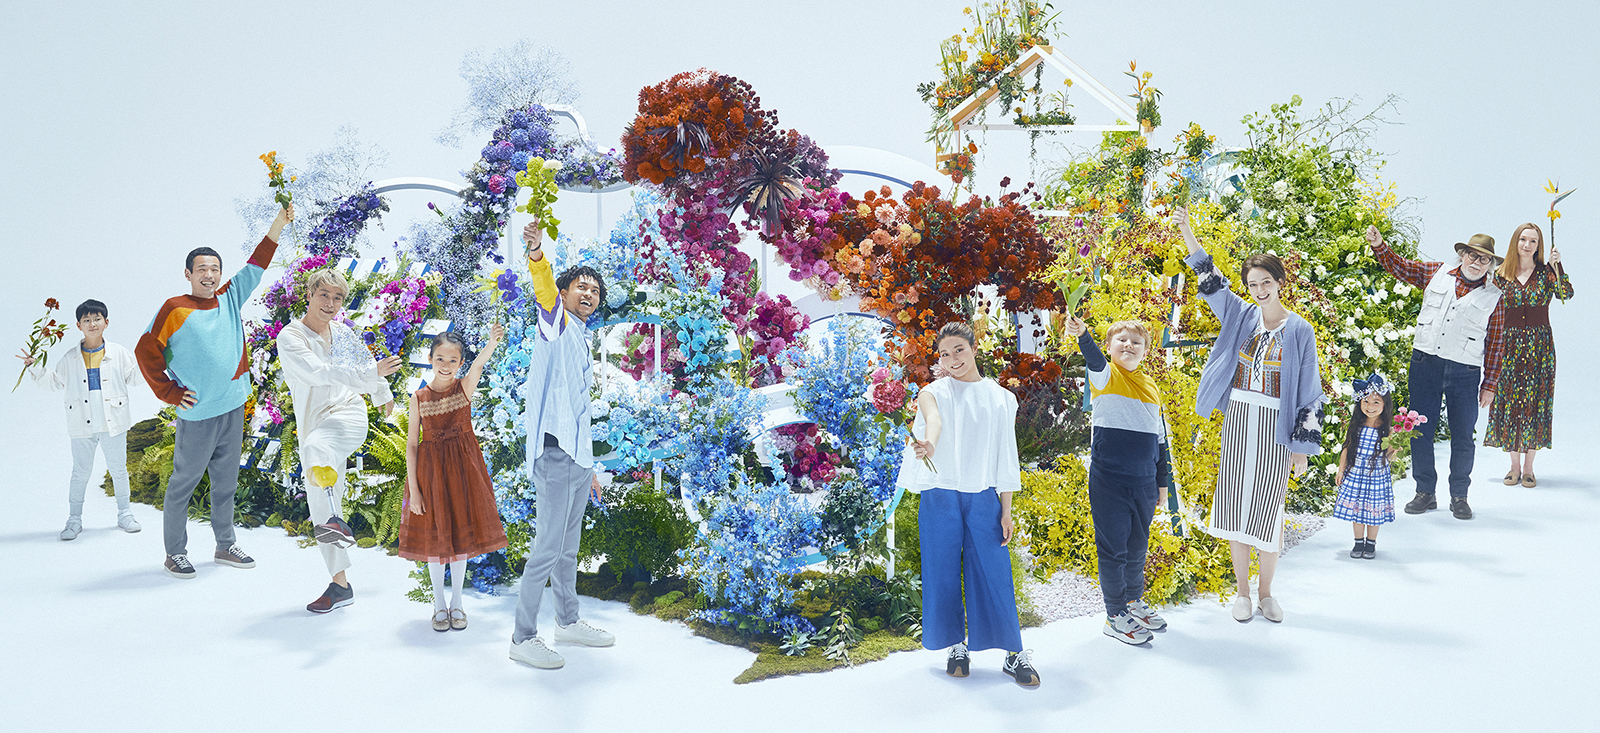 Image: Advertisement using fresh flowers to express the Panasonic Group’s Purpose, “Live Your Best”